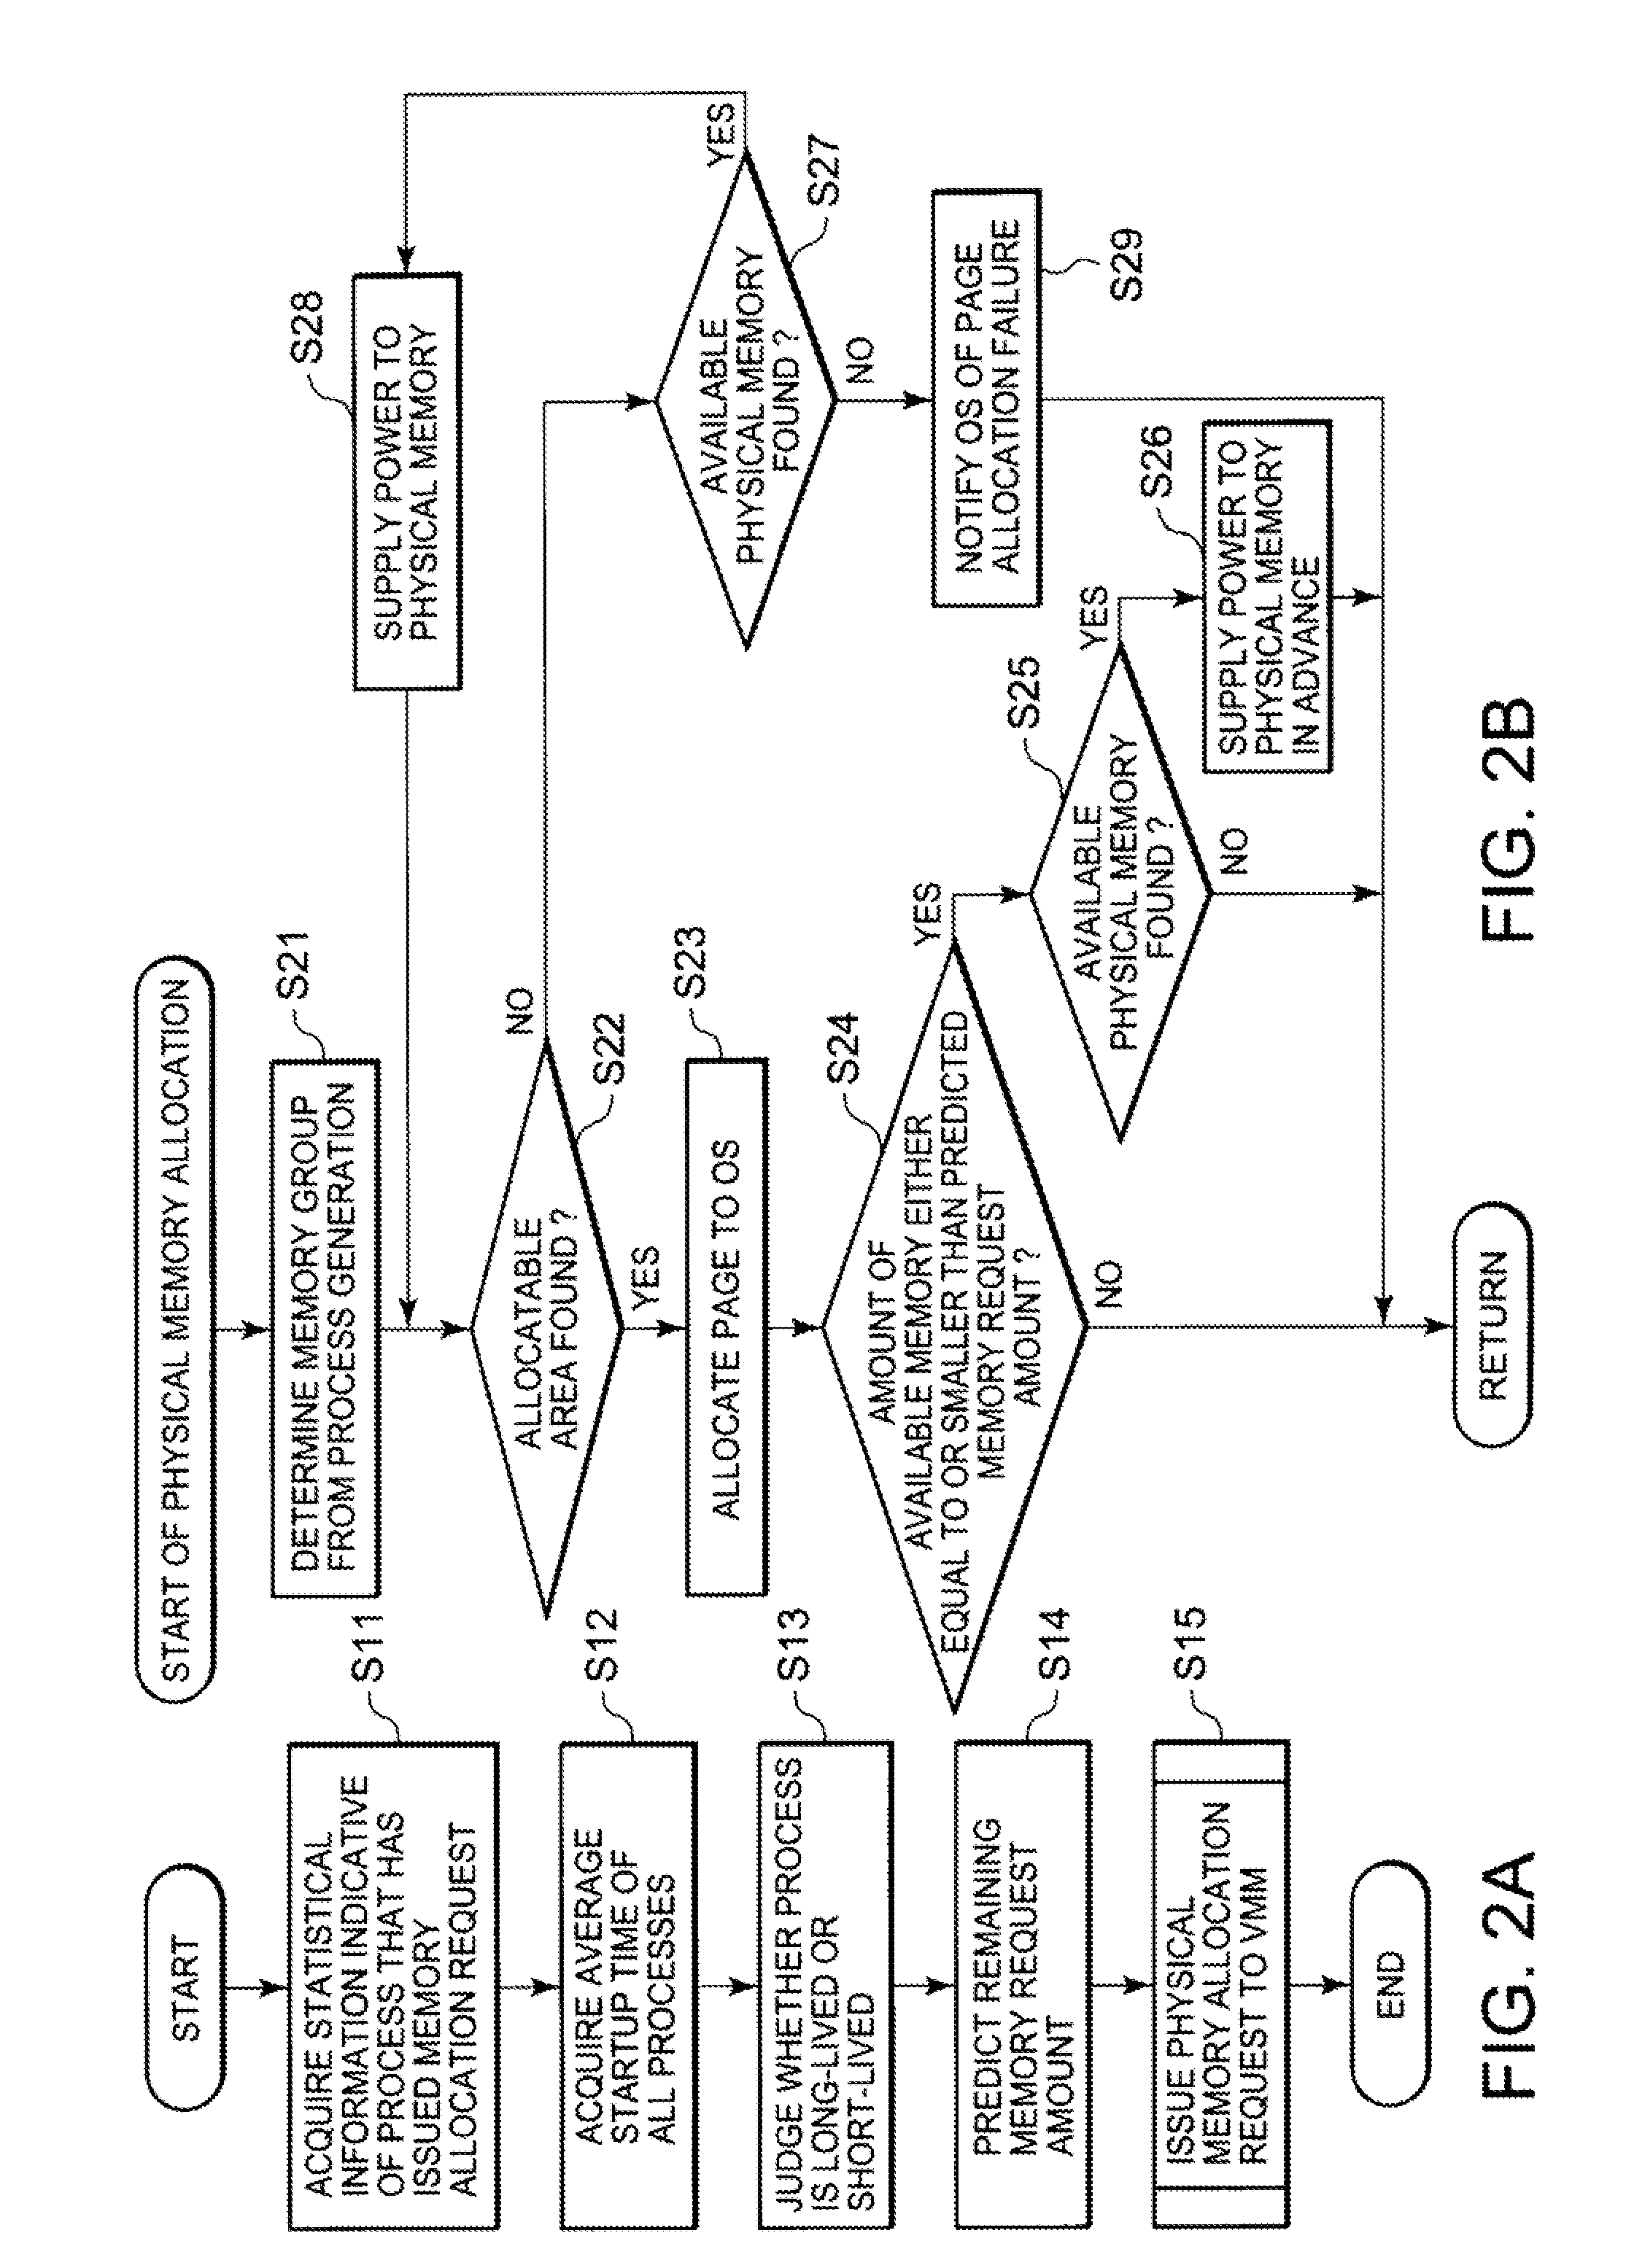 Memory power consumption reduction system, and method and program therefor